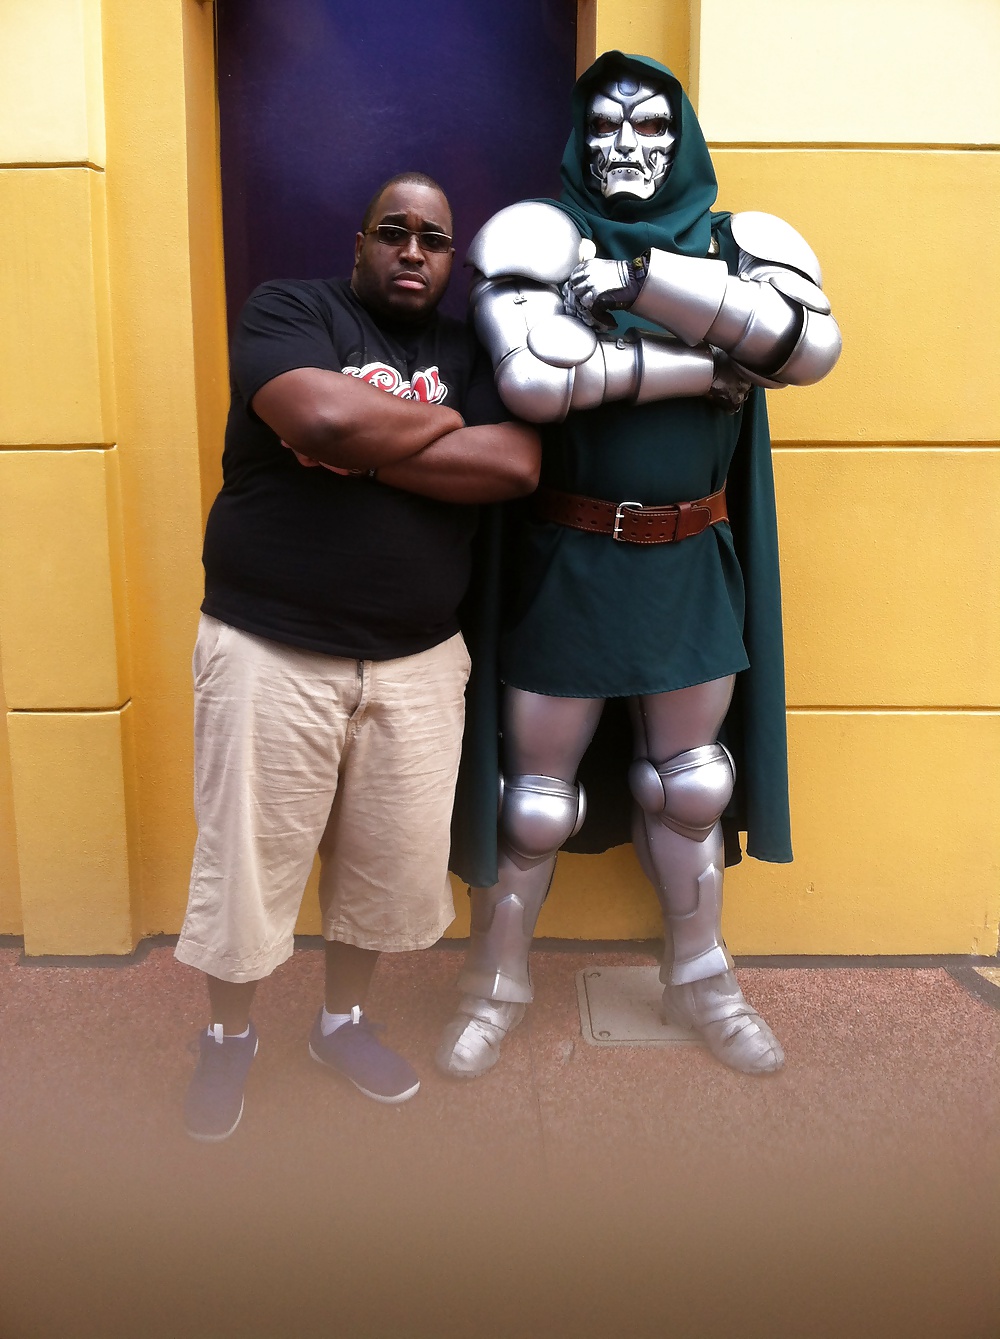 Me and Dr. Doom just chillin and hanging out #31366416